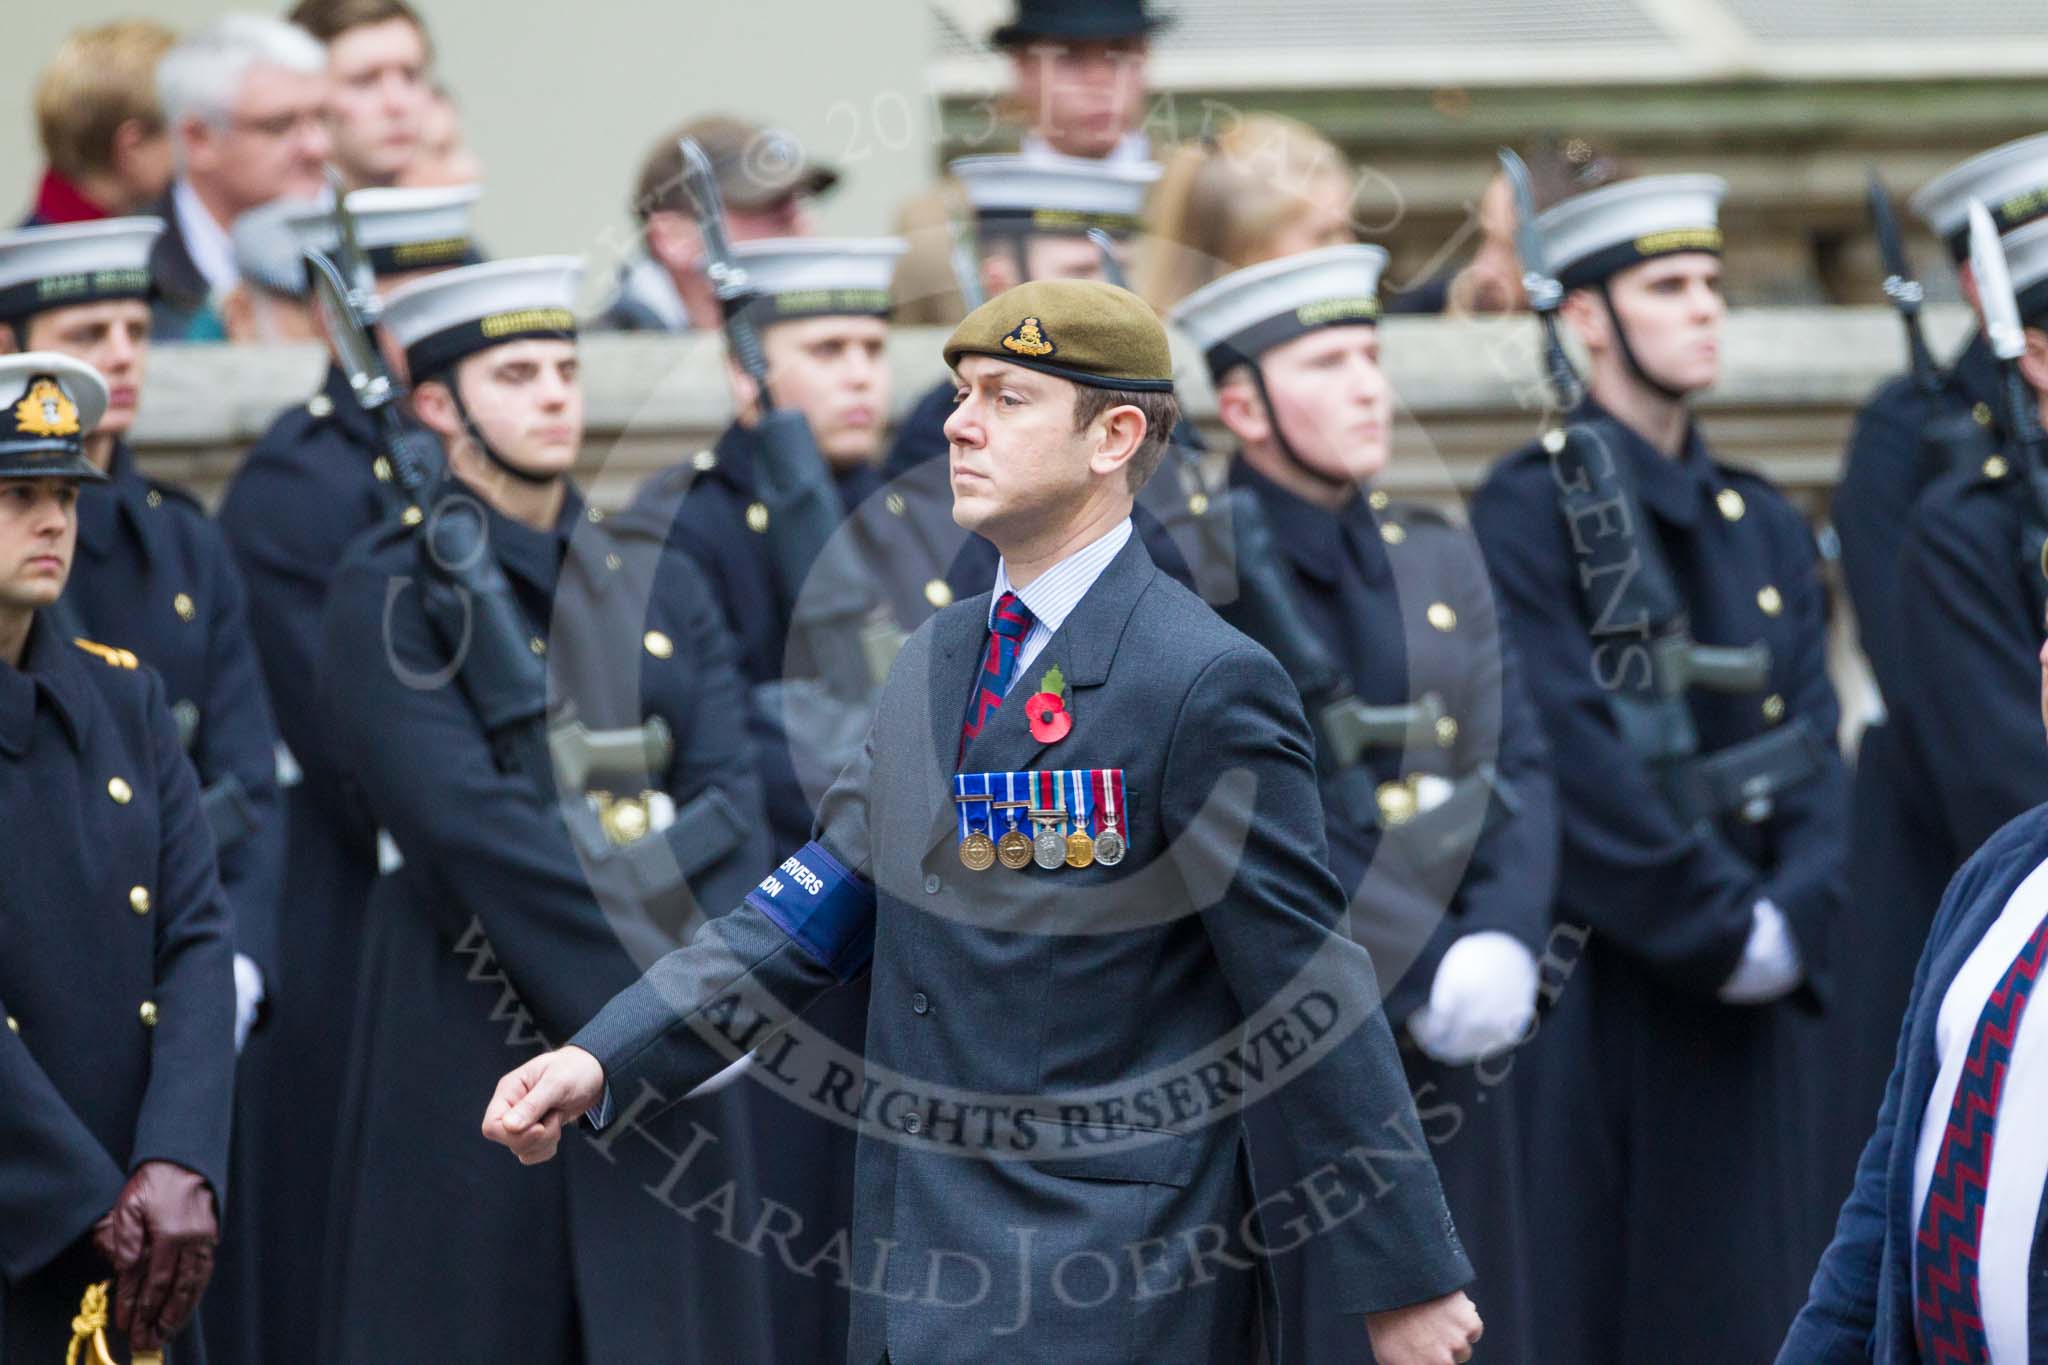 Remembrance Sunday at the Cenotaph 2015: Group B33, Gallipoli & Dardenelles International.
Cenotaph, Whitehall, London SW1,
London,
Greater London,
United Kingdom,
on 08 November 2015 at 11:43, image #256